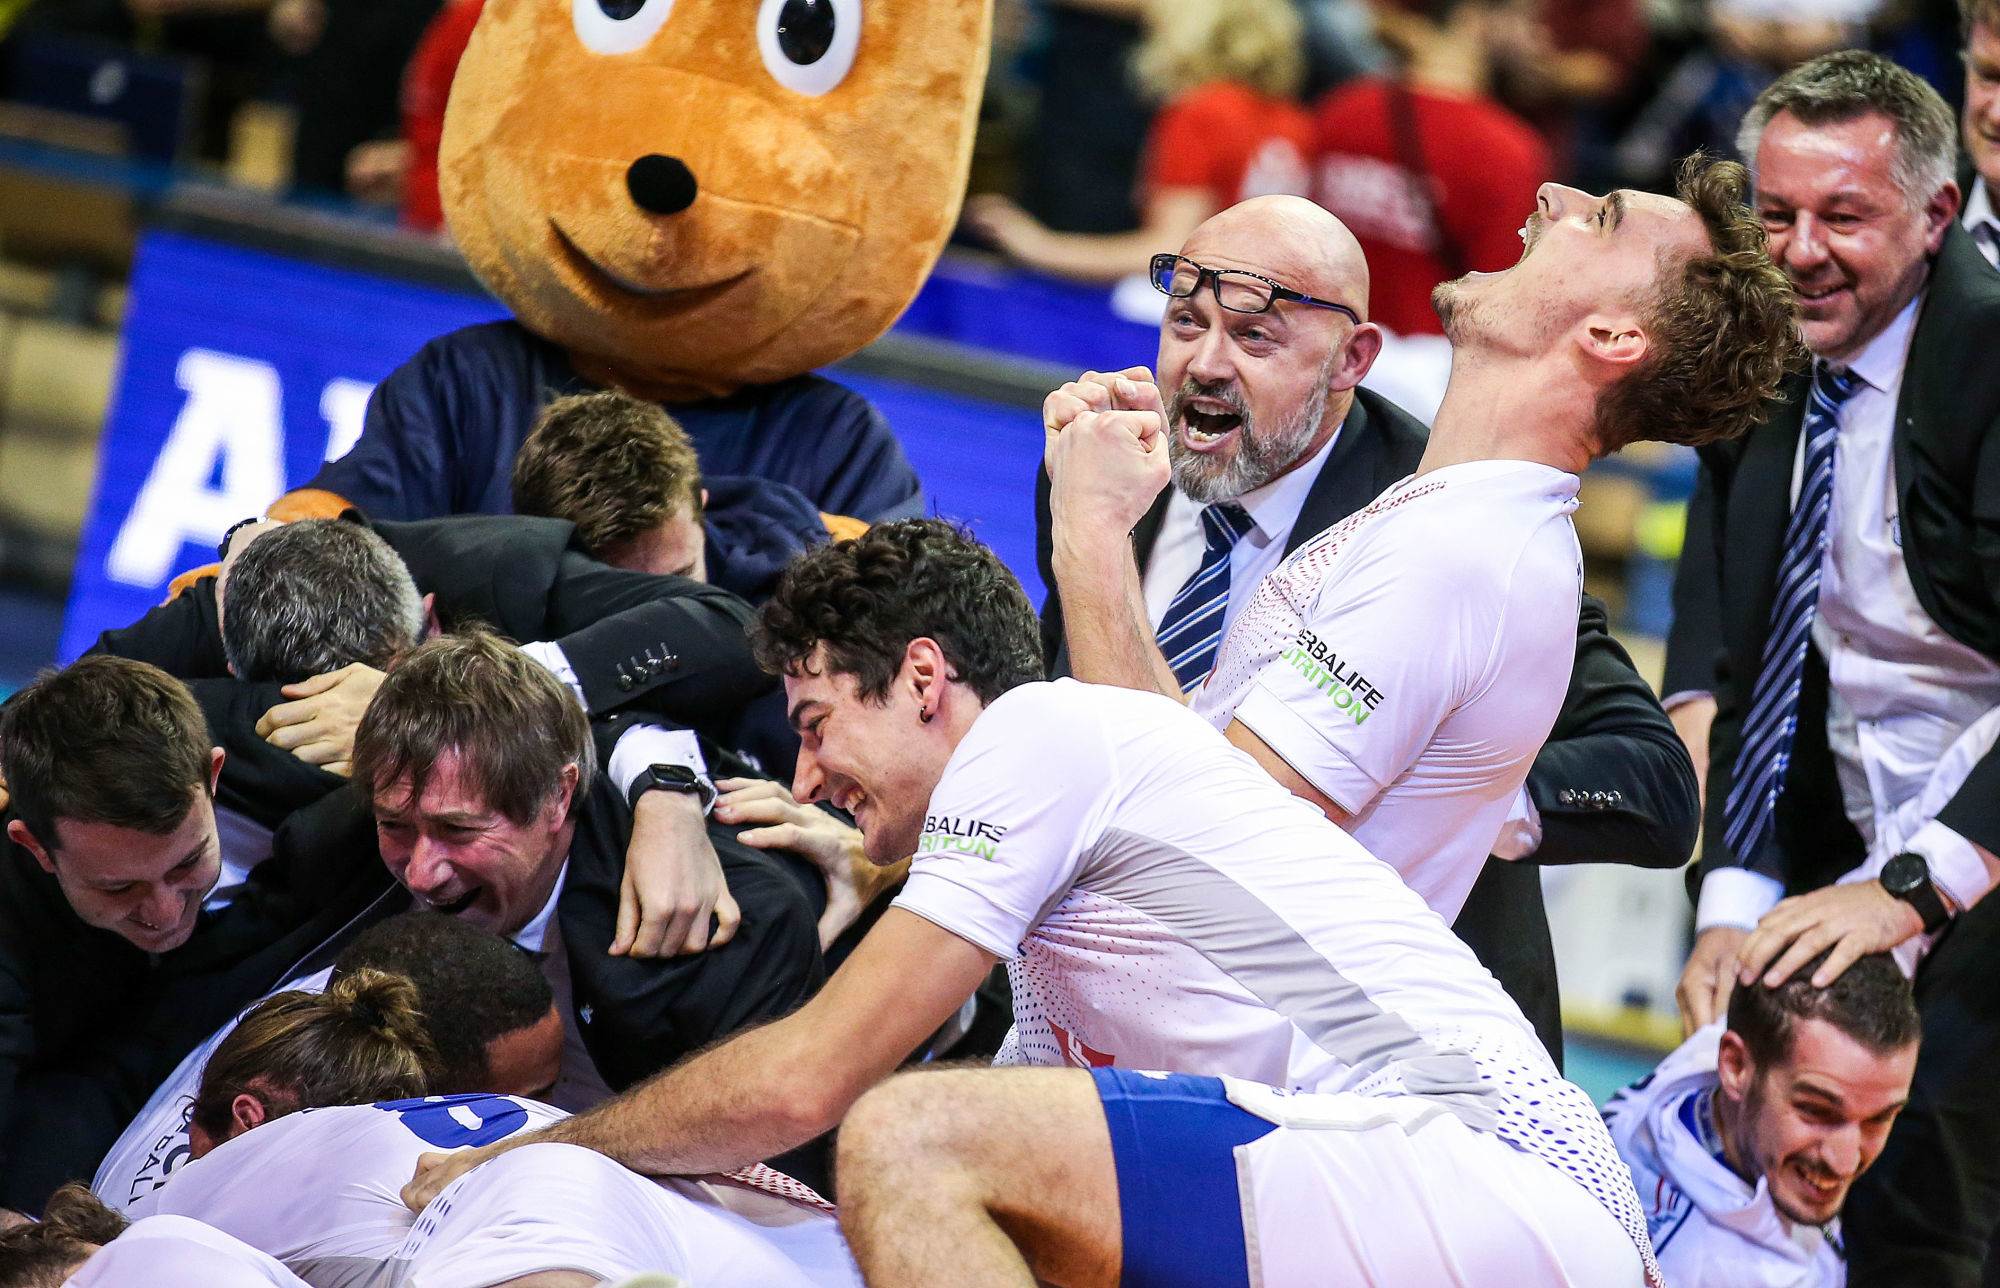 10 January 2020, Berlin: Volleyball, men: Olympic qualification, France - Germany, final round, final, Max-Schmeling-Halle. Jean Patry (3rd from right) from France clenches his fists and screams with joy of victory. Photo: Andreas Gora/dpa | usage worldwide 

Photo by Icon Sport - Jean PATRY